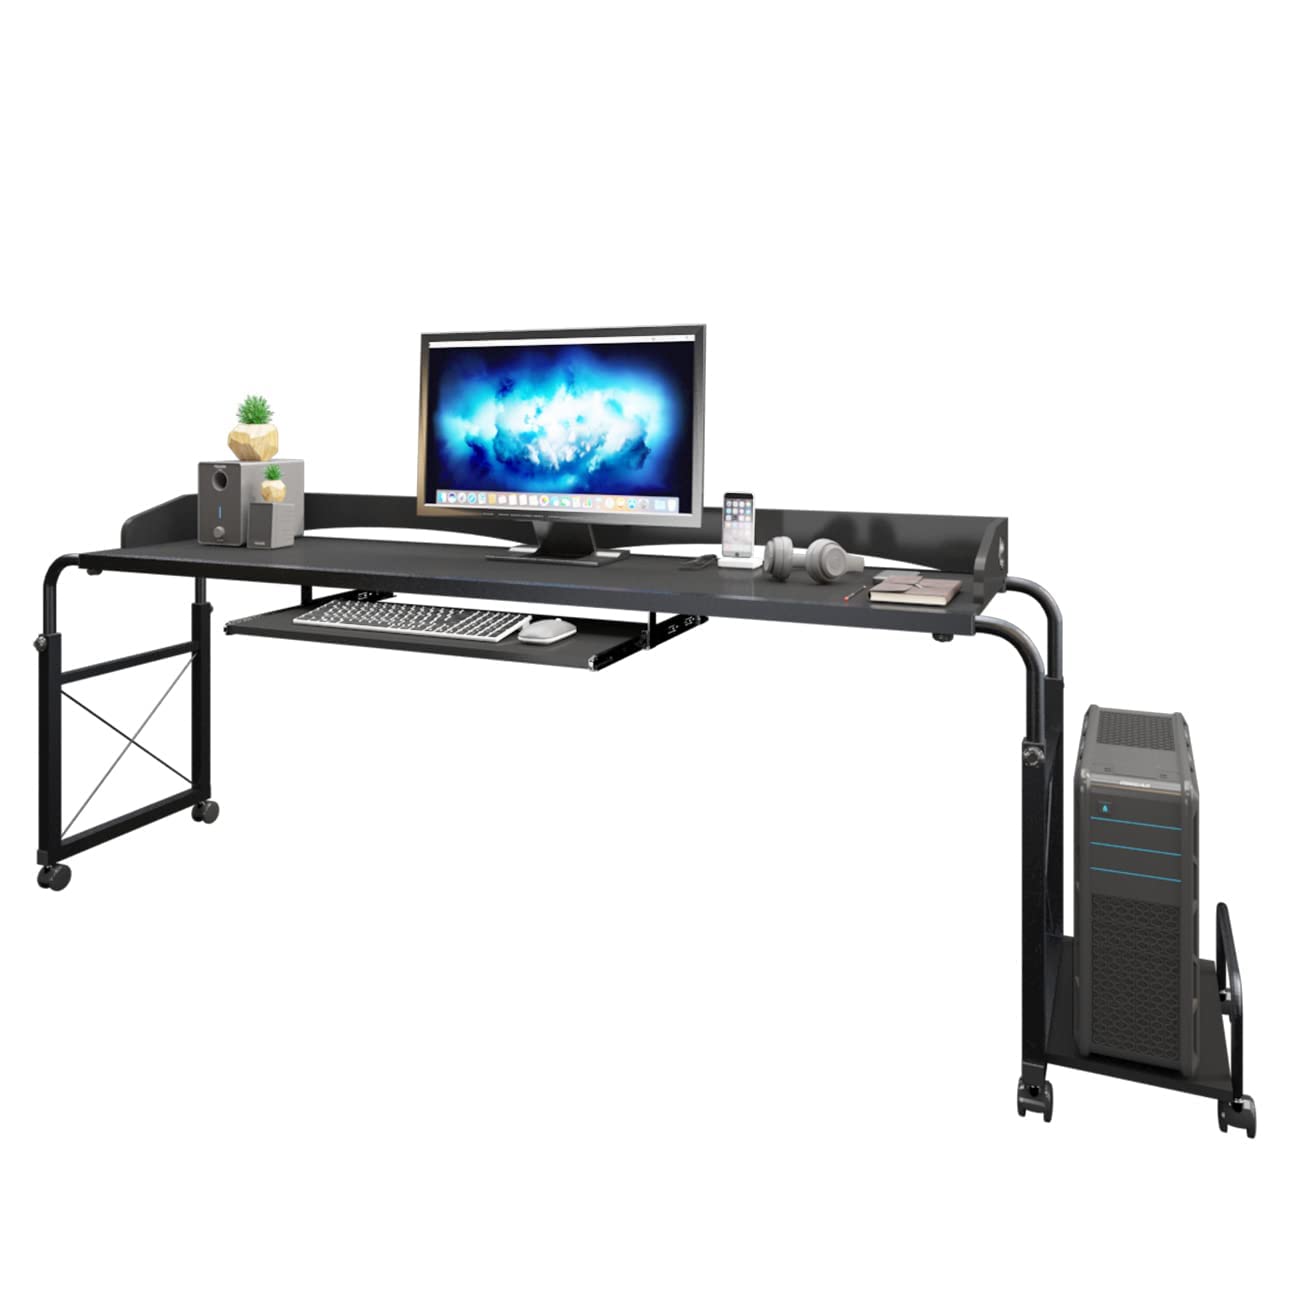 SogesHome 55'' Overbed Desk Laptop Cart with Wheel, 55